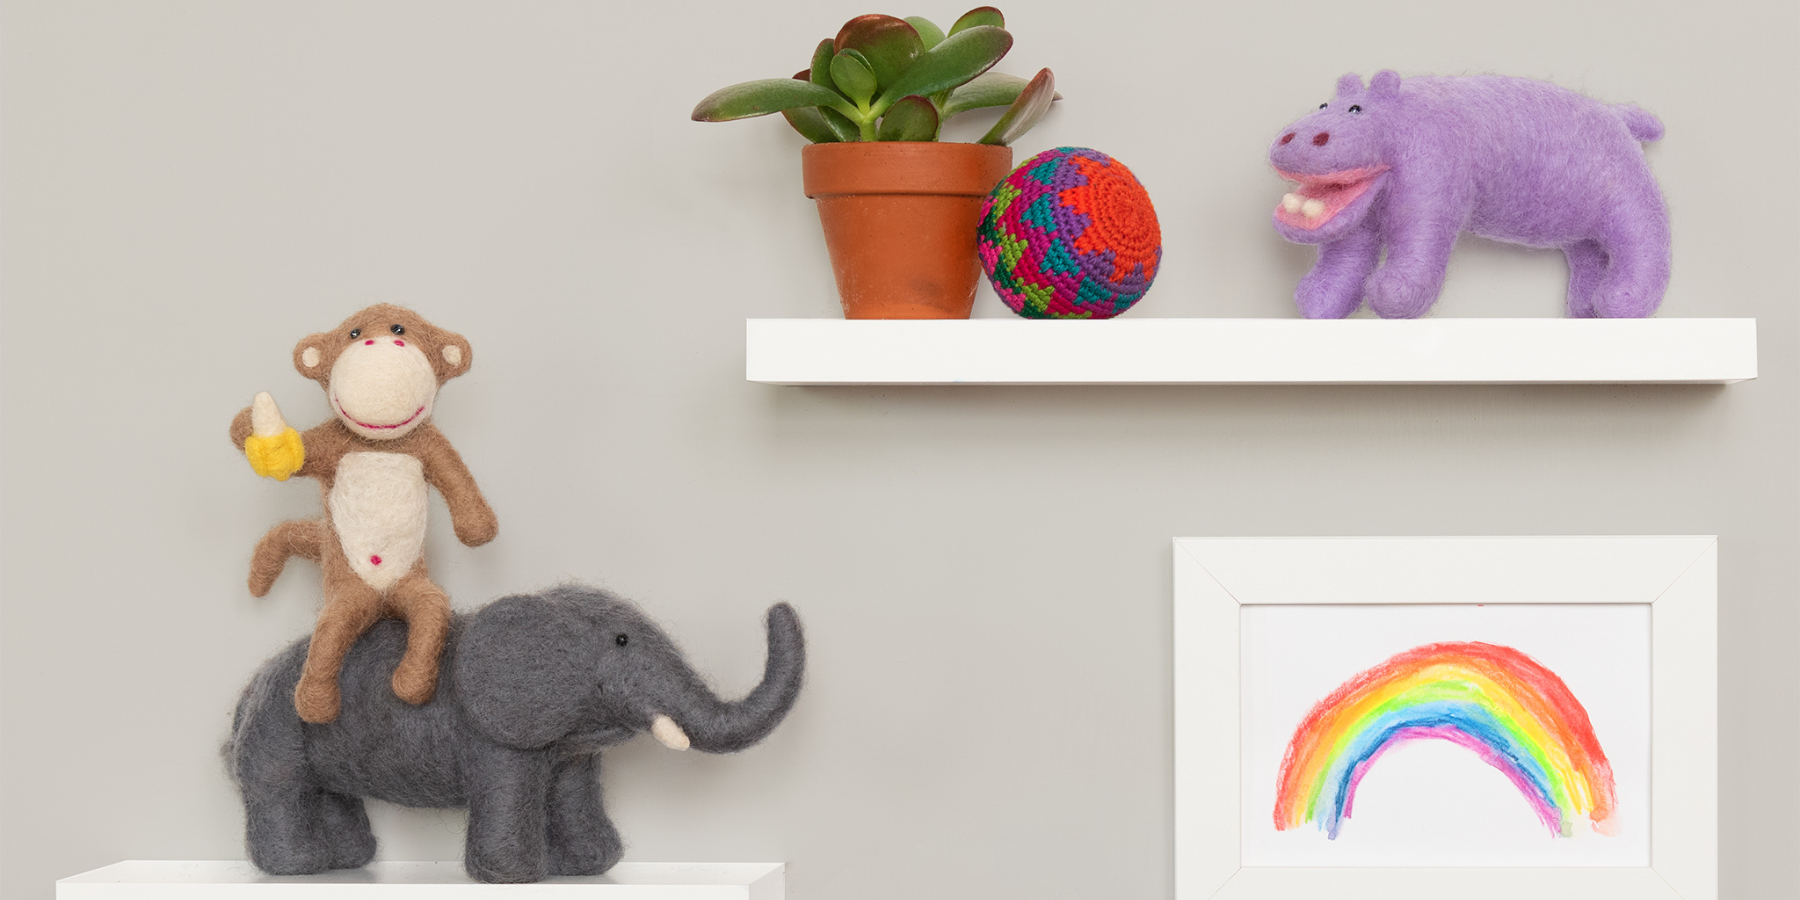 Whimsical needle felted animal figures of an elephant, monkey holding a banana, and purple hippo sit on white shelves mounted on a light grey wall with a small plant and a framed rainbow artwork